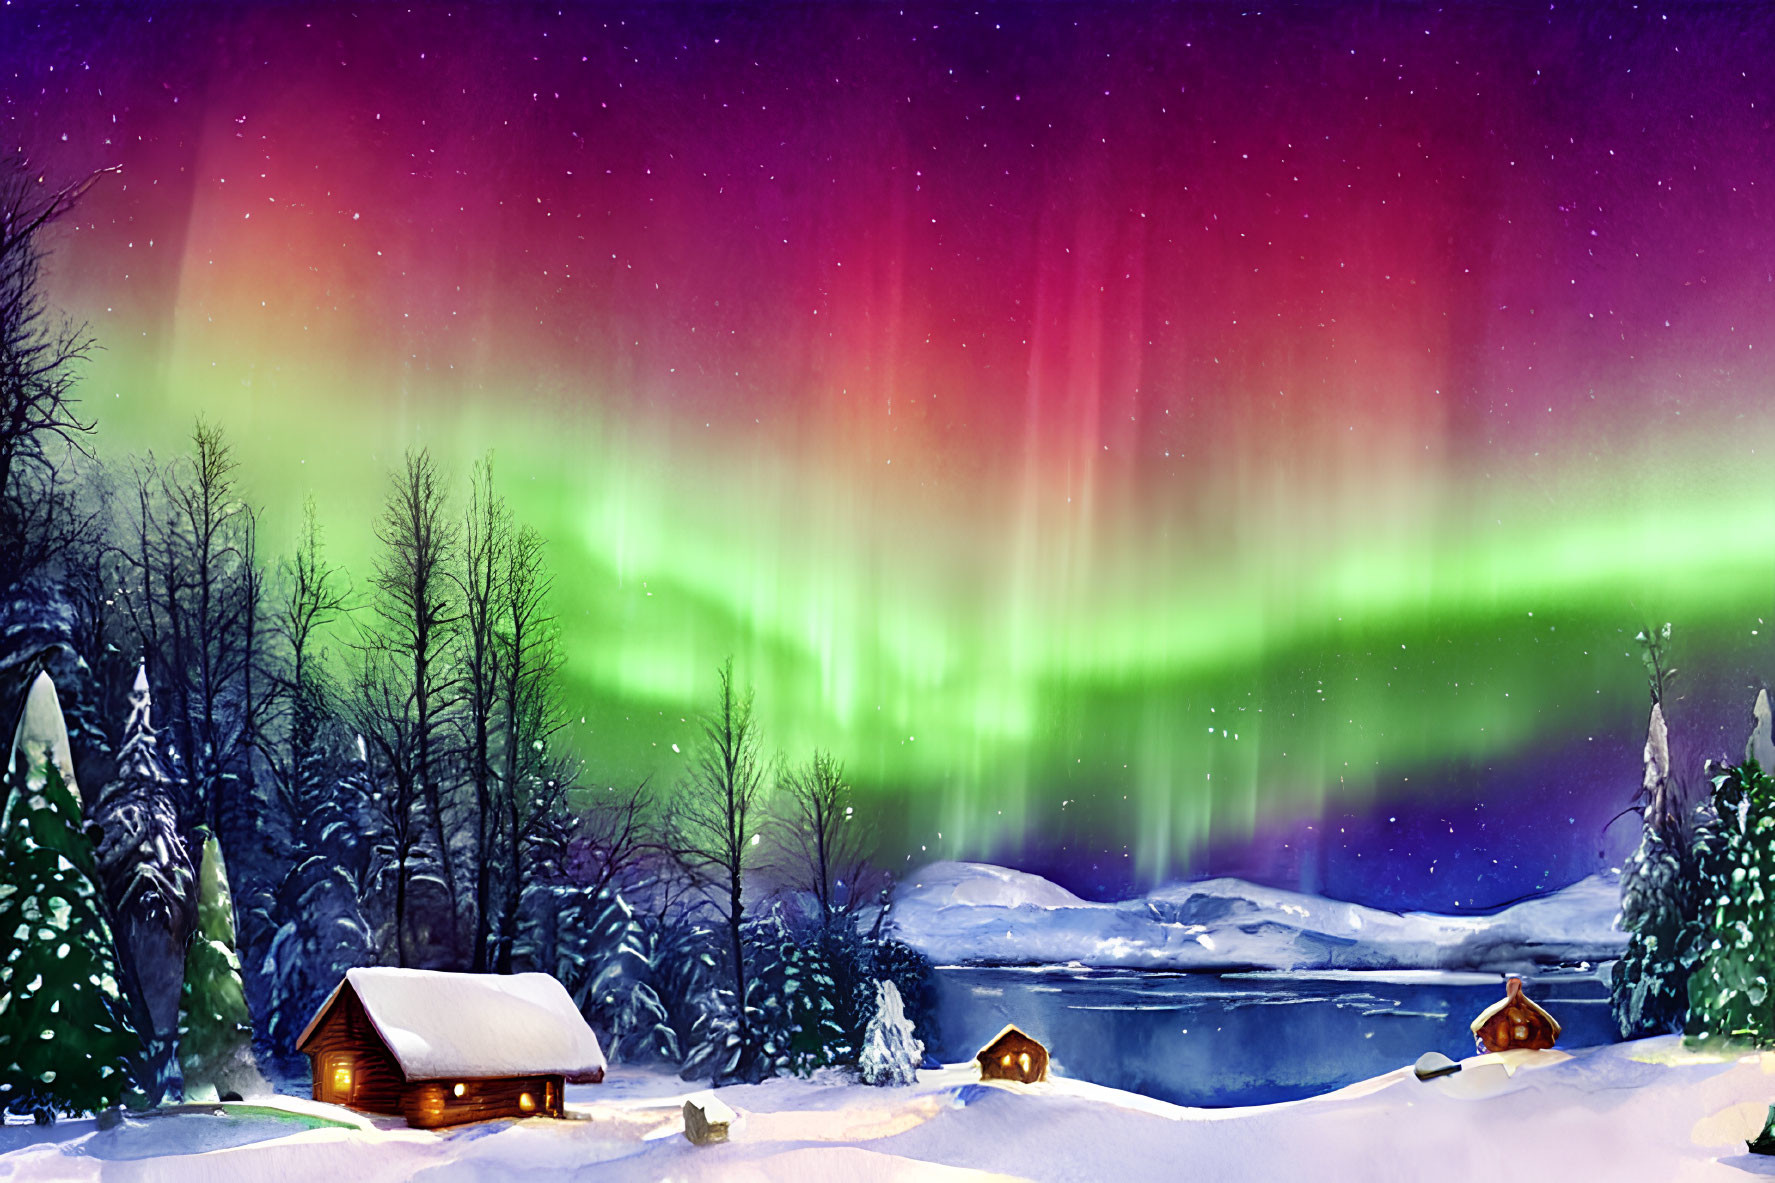 Vibrant aurora borealis over snow-covered cabins and frozen lake